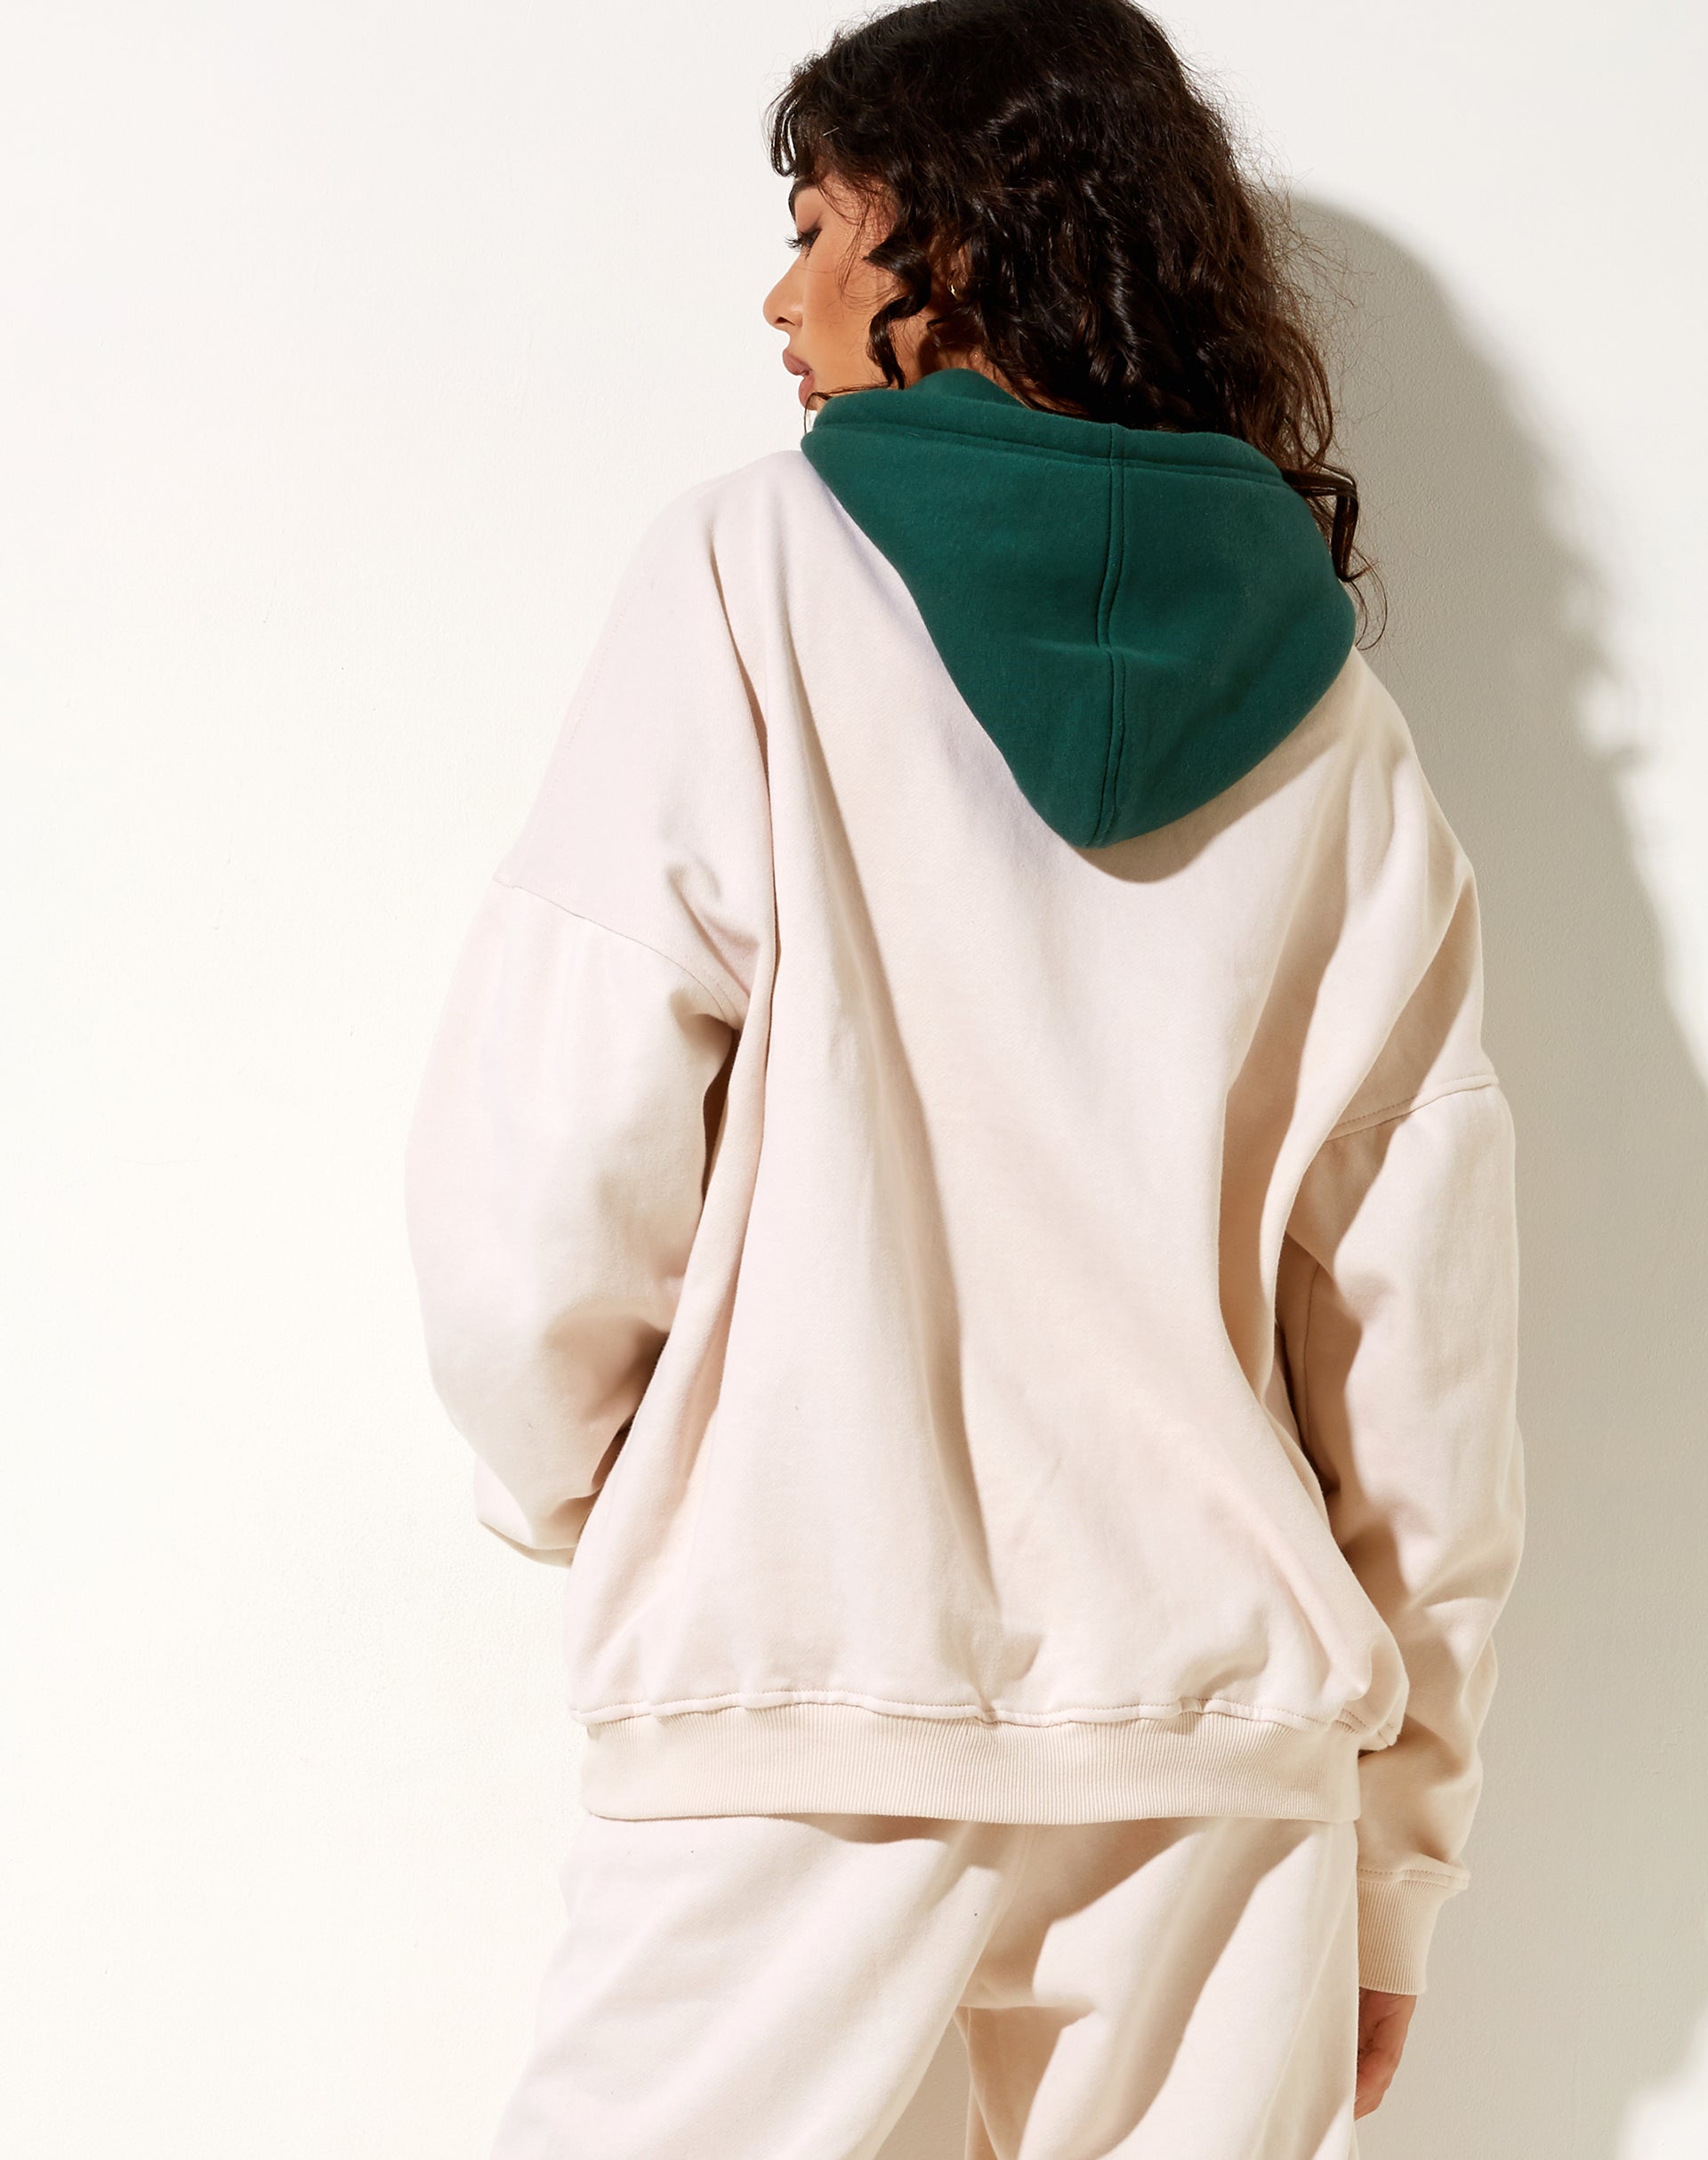 Image of Oversize Hoodie in Forest Green Winter White M Embro